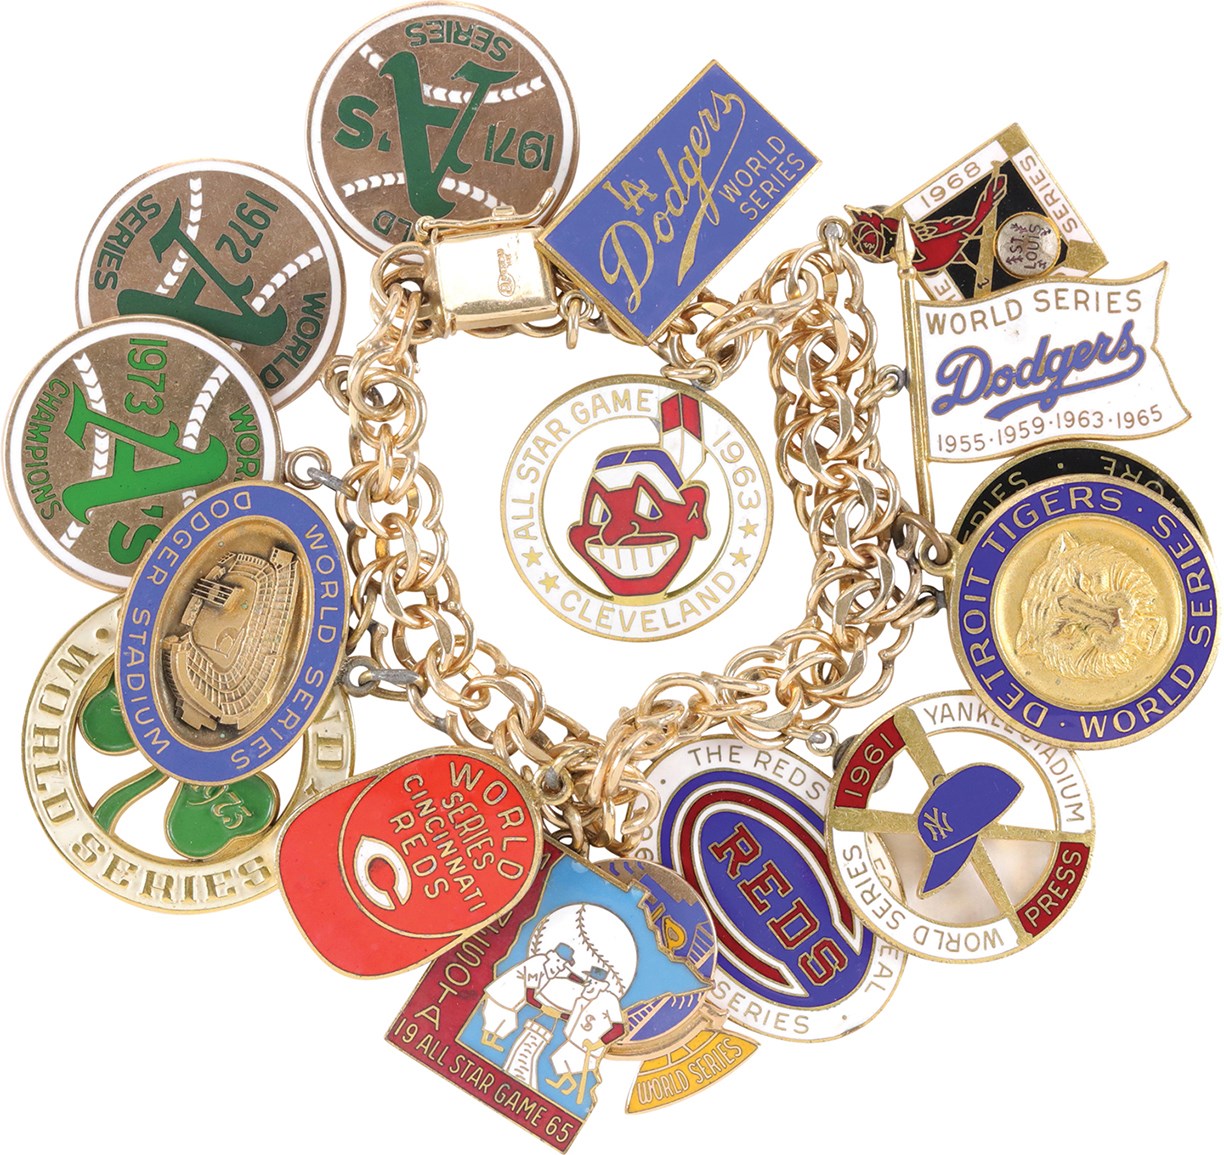 Baseball Awards - Charles O. Finley's 1960s-70s World Series and All Star Game Gold Charm & Press Pin 14k Gold Bracelet